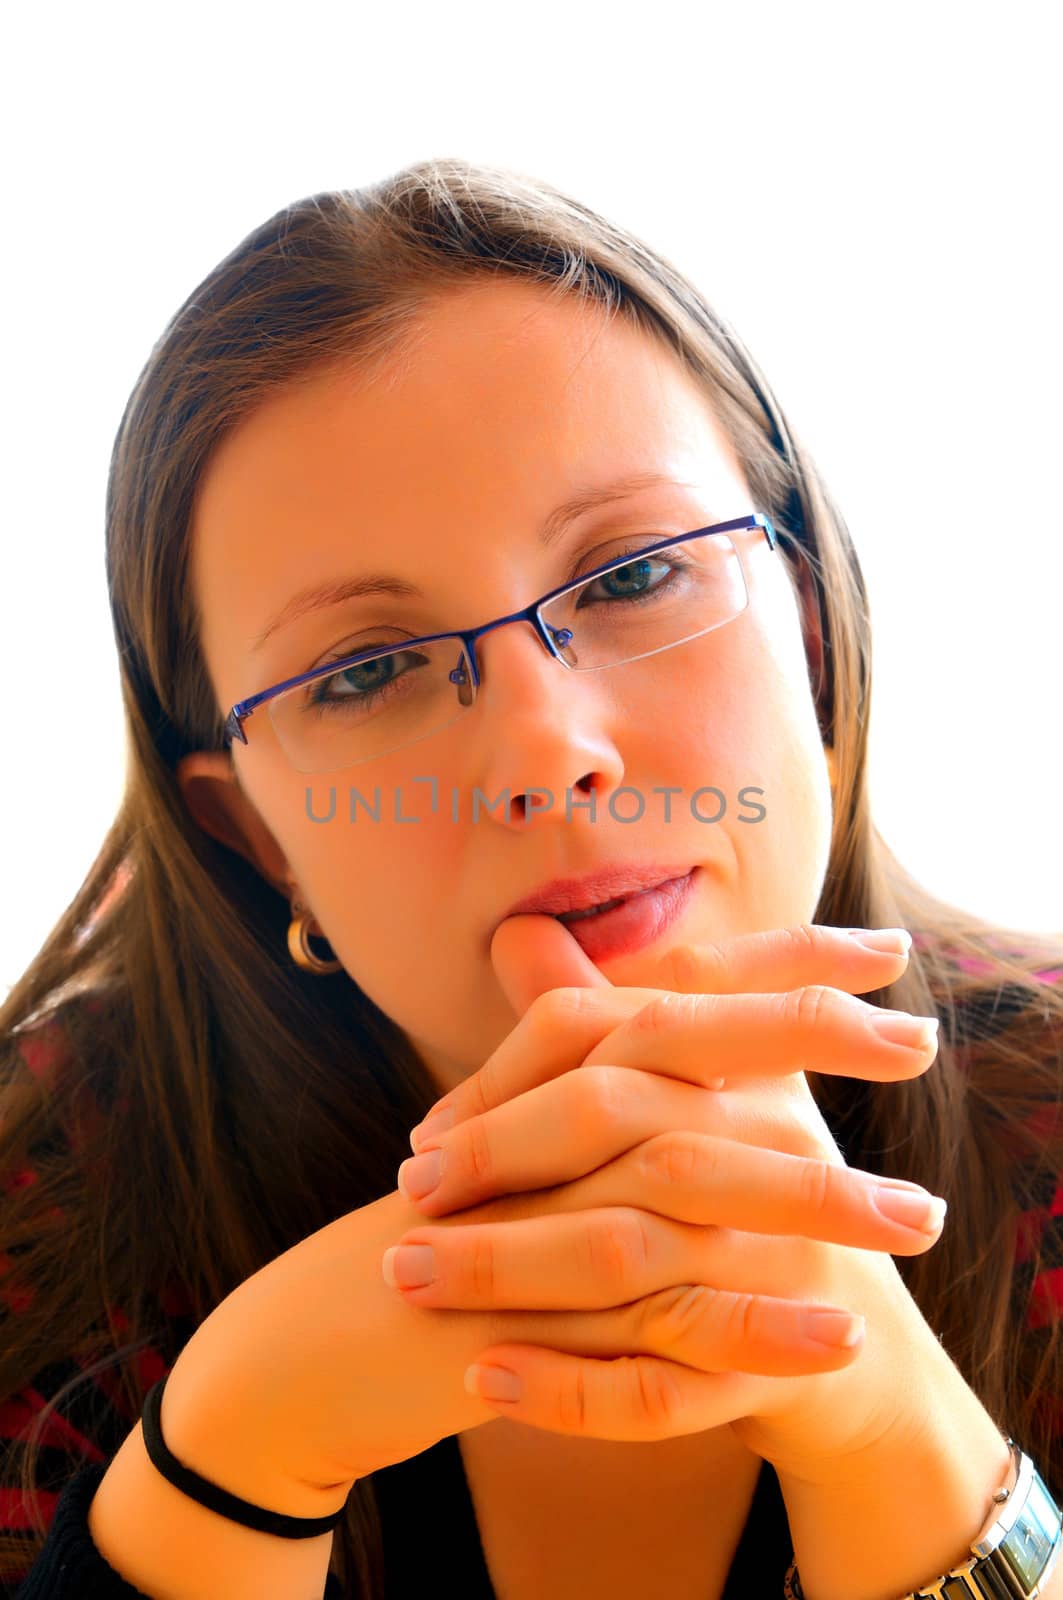 Portrait of a beautiful girl with glasses who clasped her hands and looks straight at the photographer